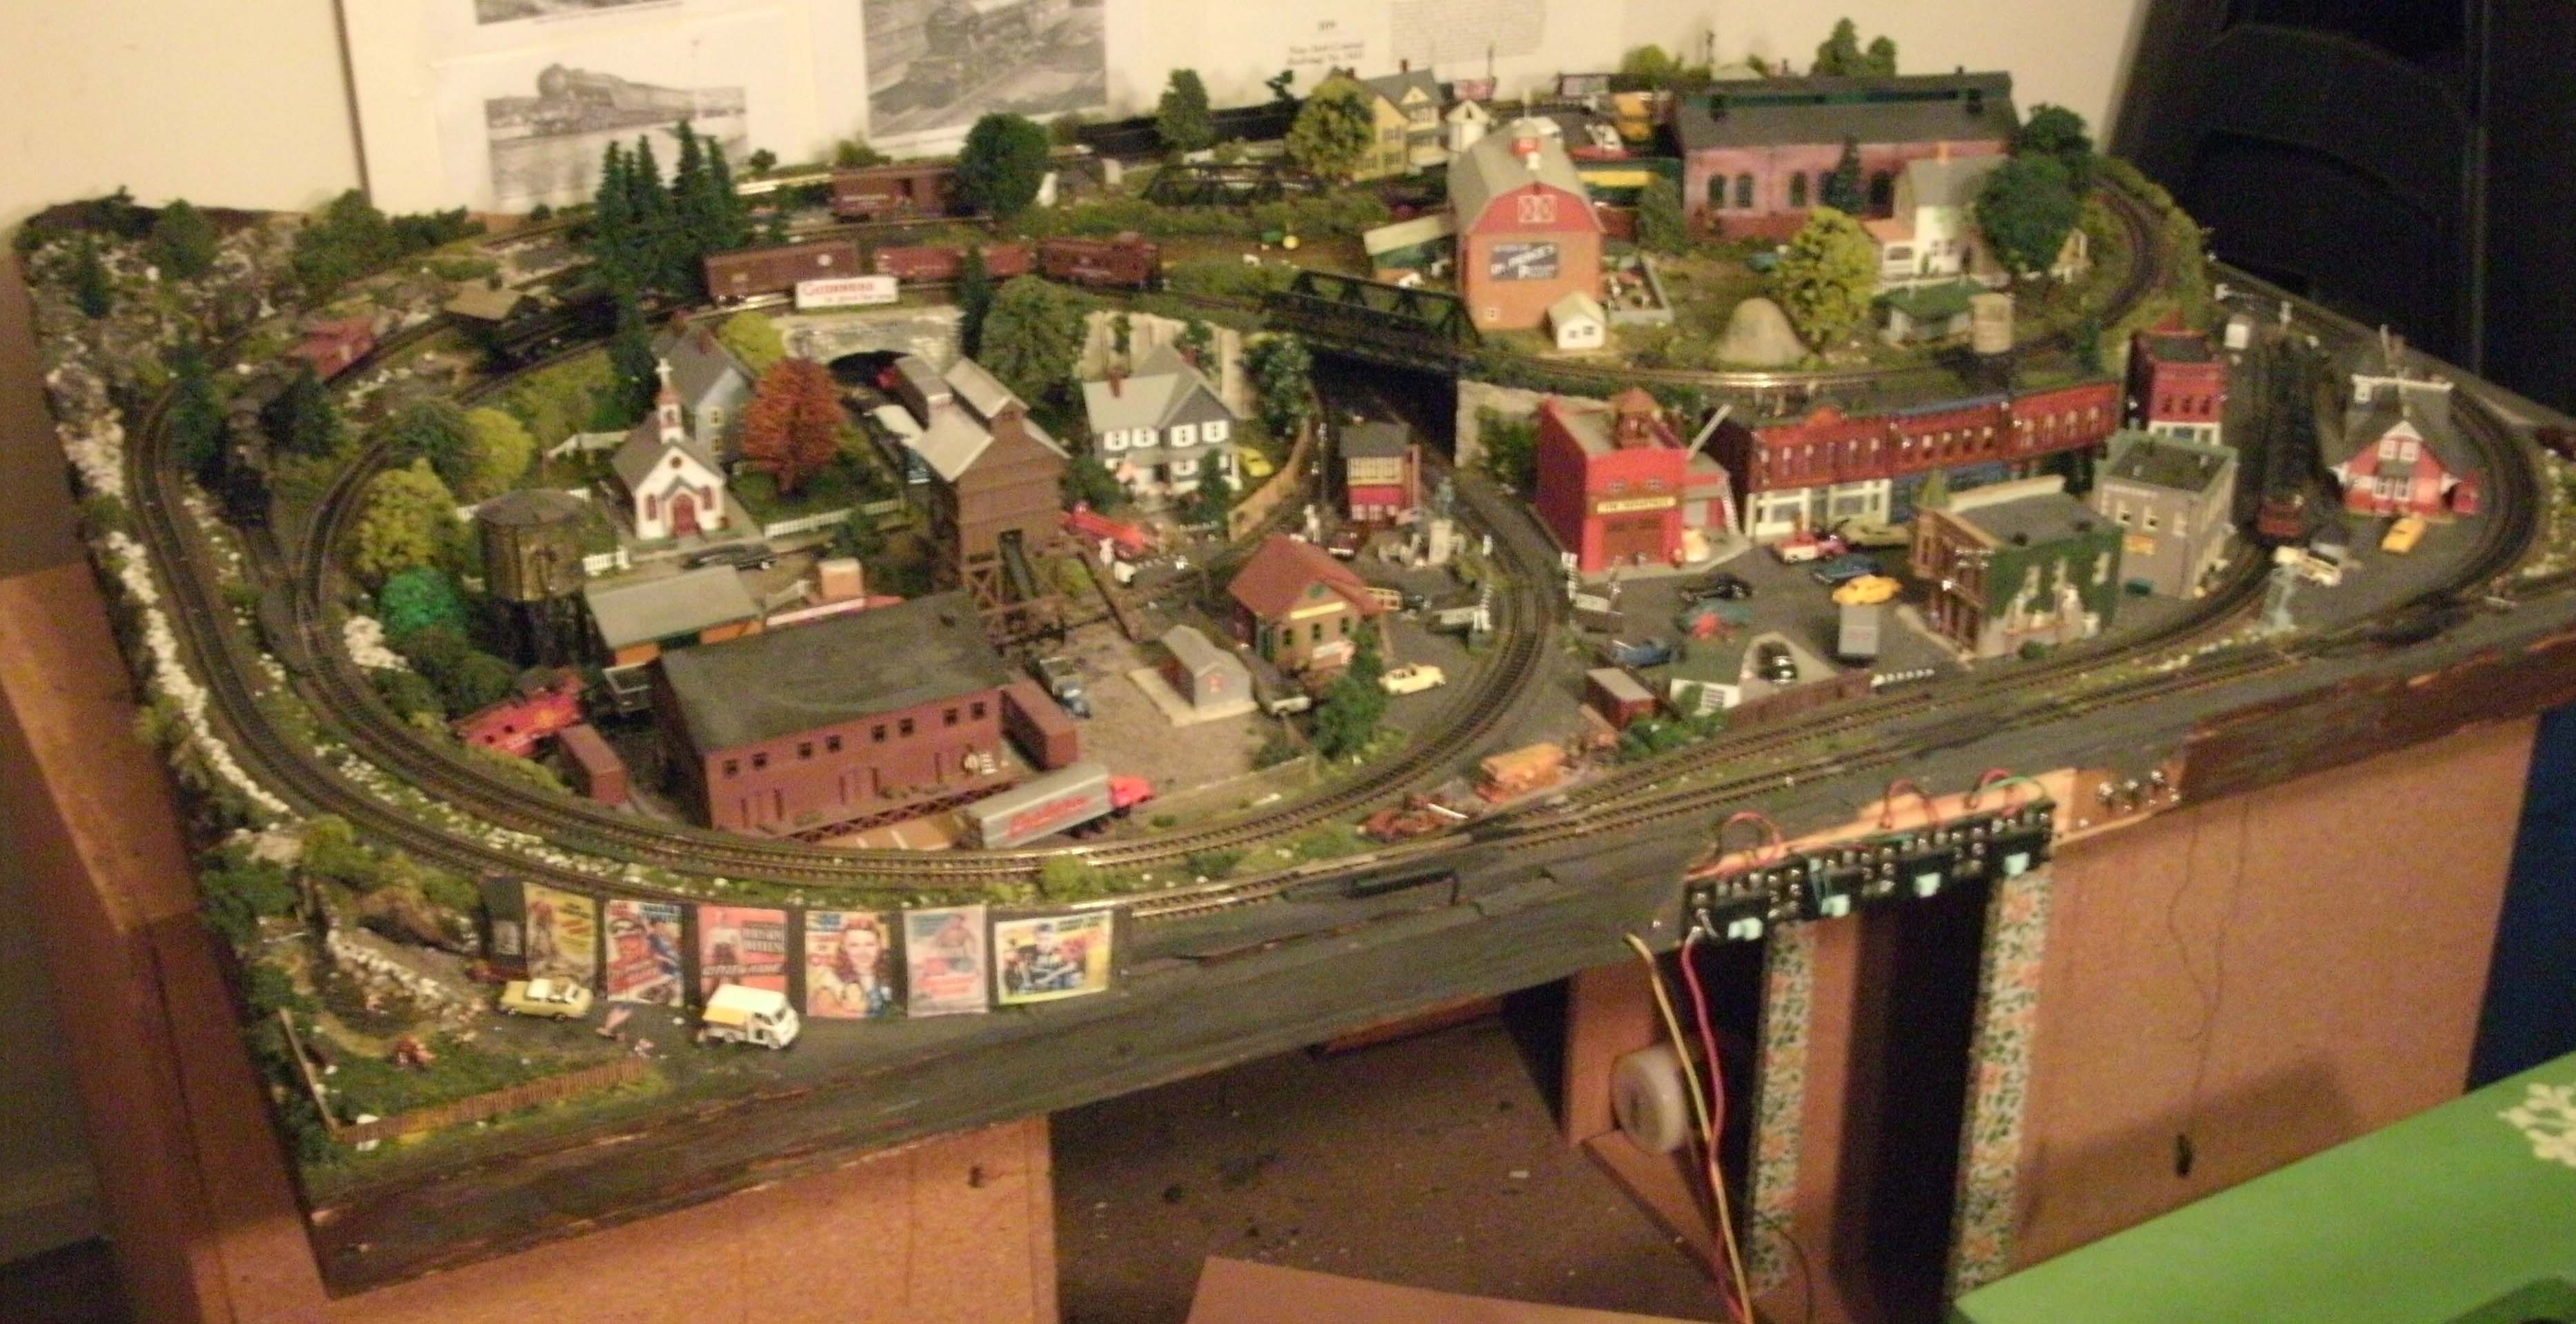 Geoff S N Scale Model Railroad Layout Great Model Trains,Rich Bordelaise Sauce